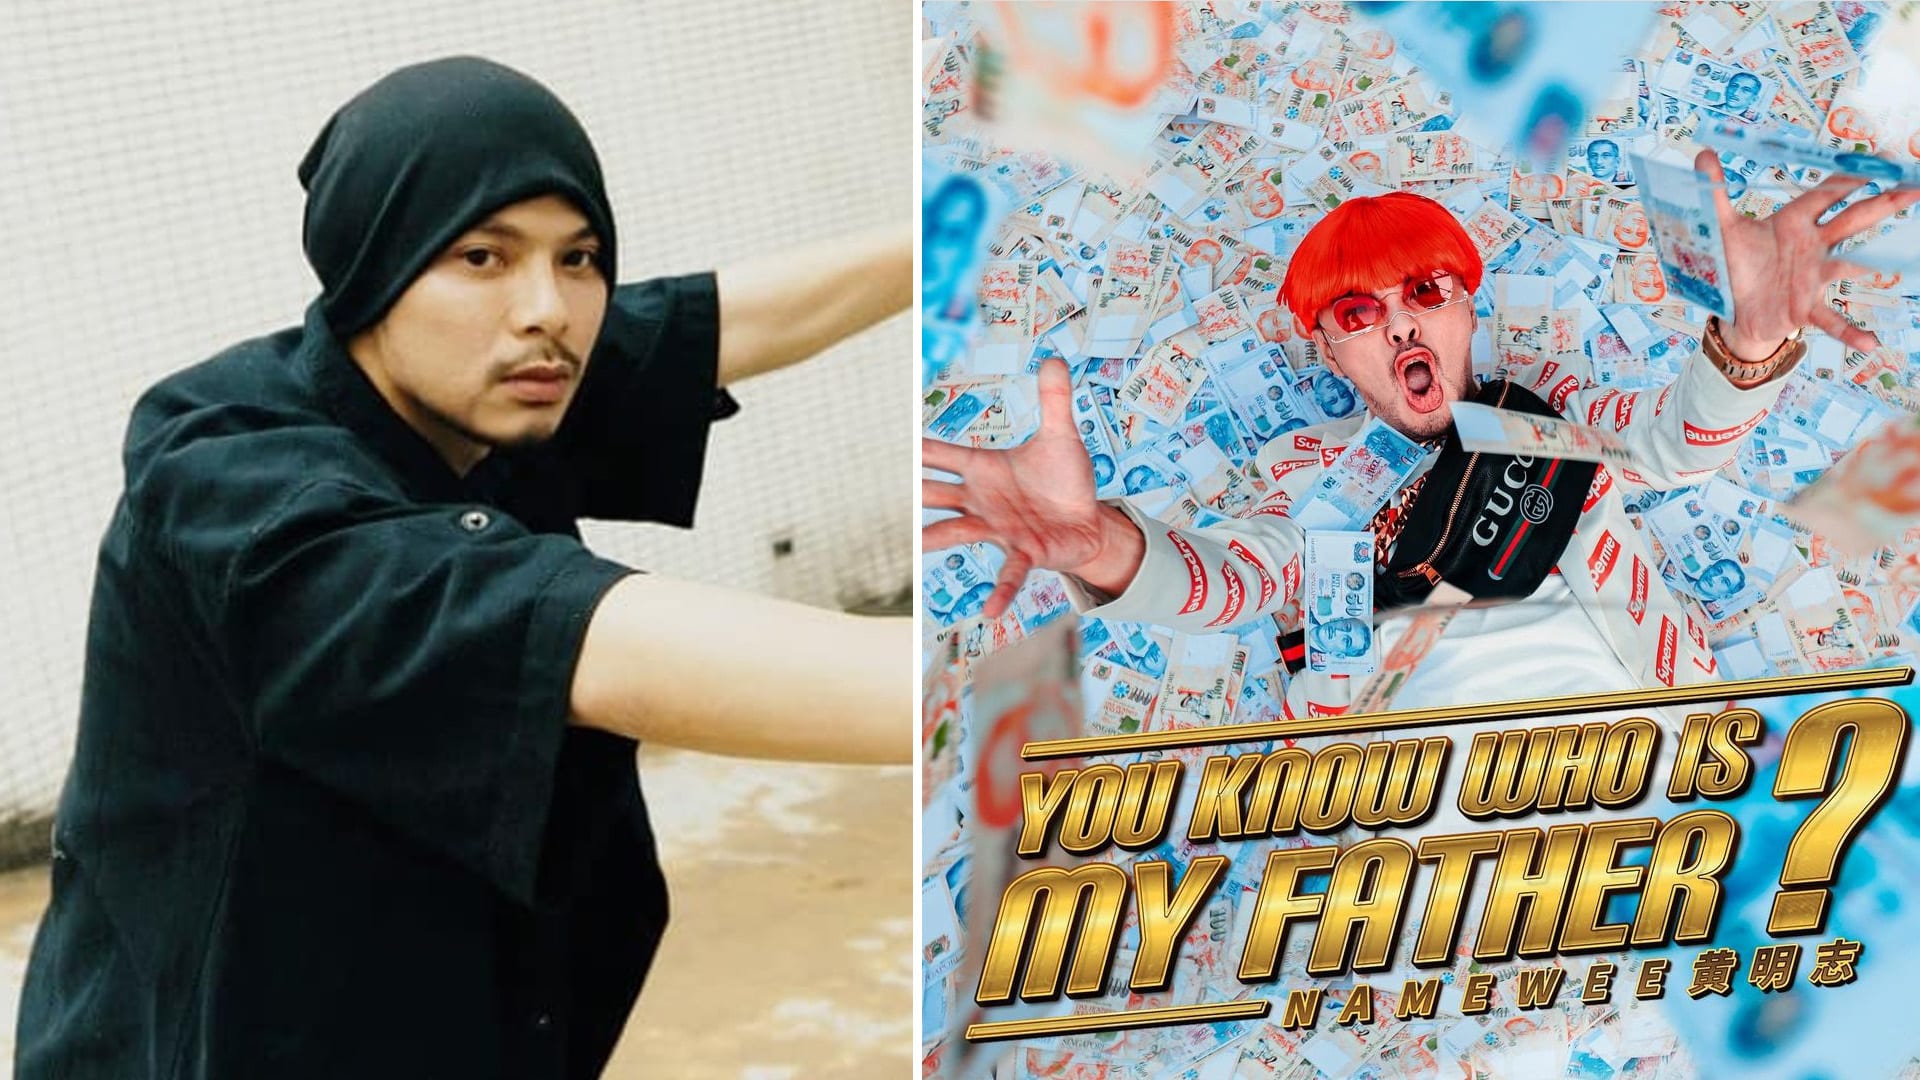 Namewee Thanks Blackpink Fans For Driving Traffic To His New Music Video After They Complained About The Song Being Sexist